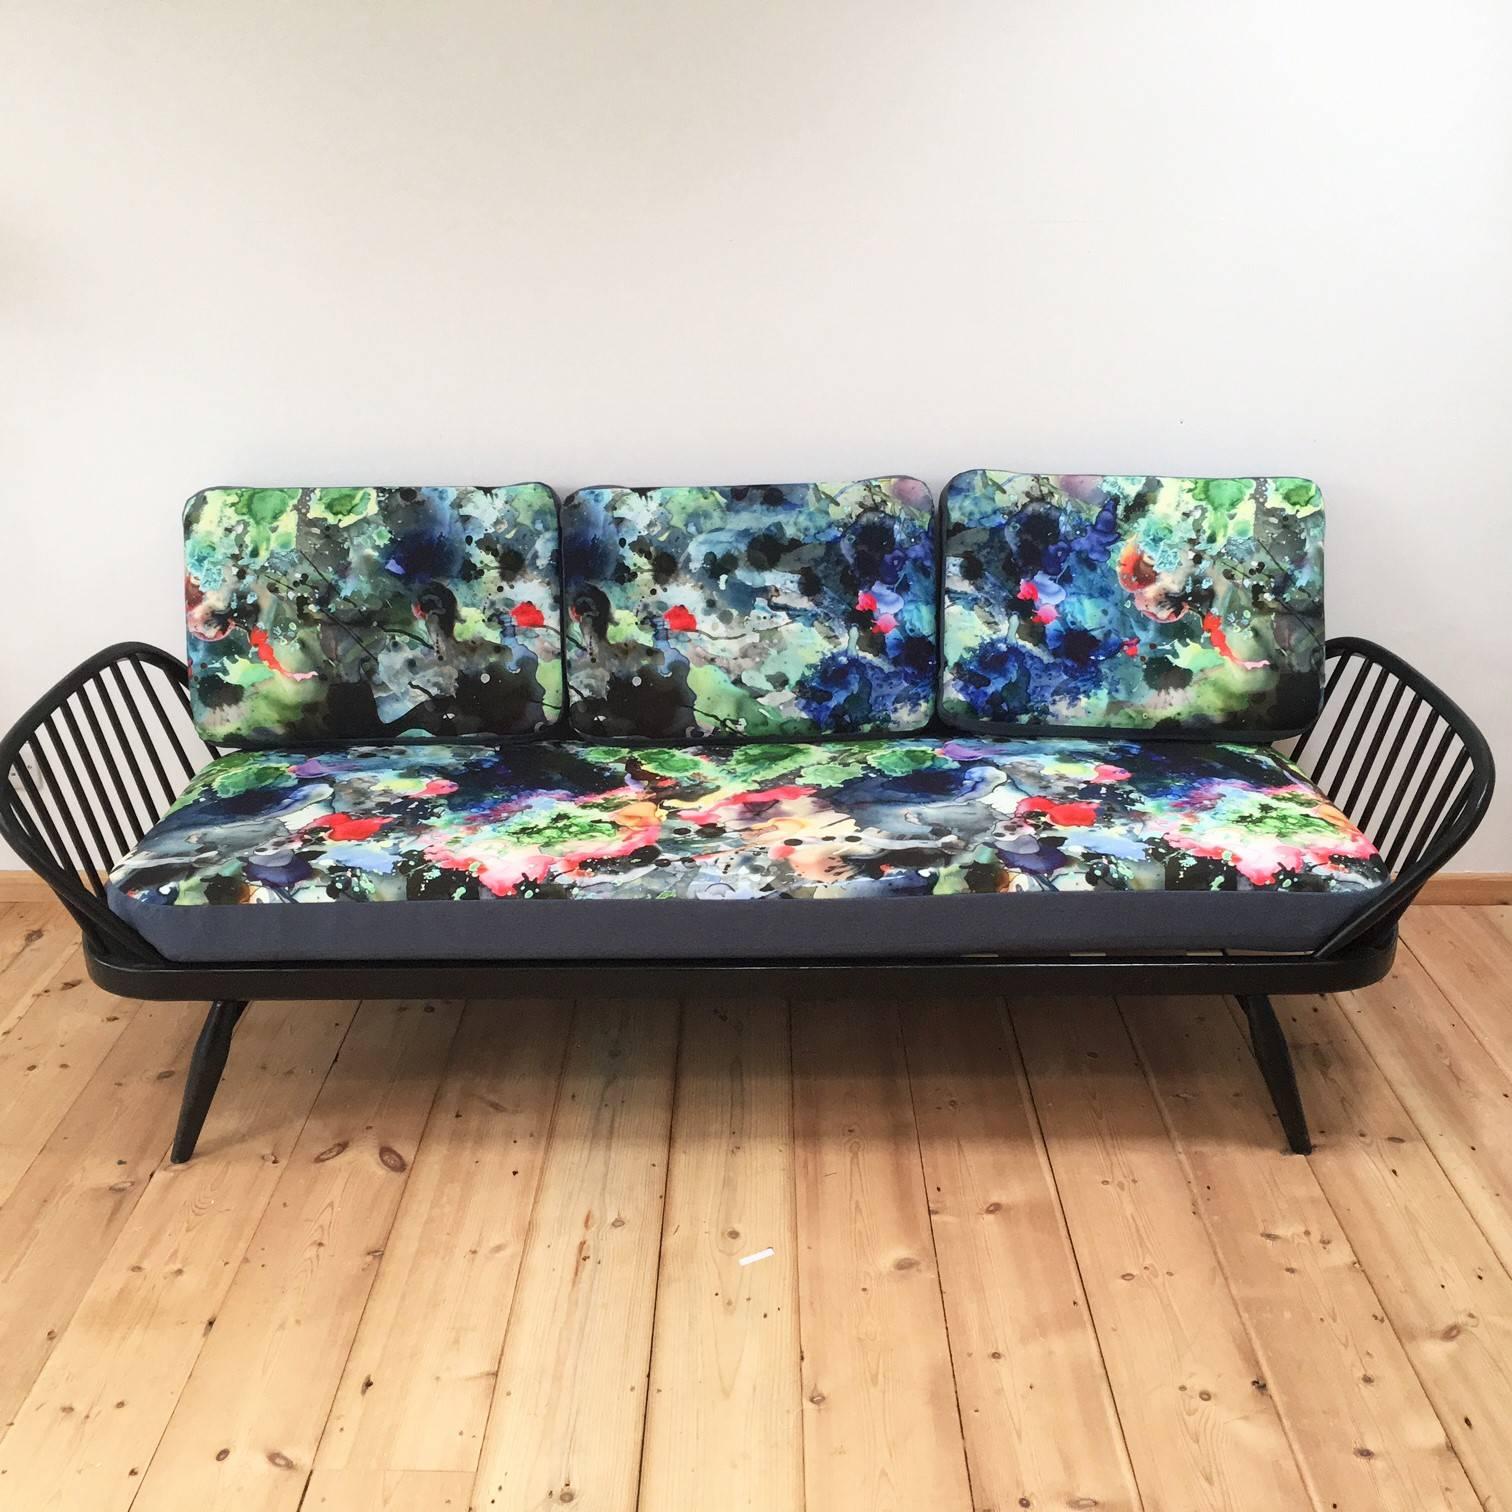 Vintage Ercol Studio couch lovingly refurbished and upholstered in timorous beasties Kaleido Splatt all-over print fabric.
 
The Ercol couch itself has been re-sprayed and is available in either black or white satin paint finish with new webbing